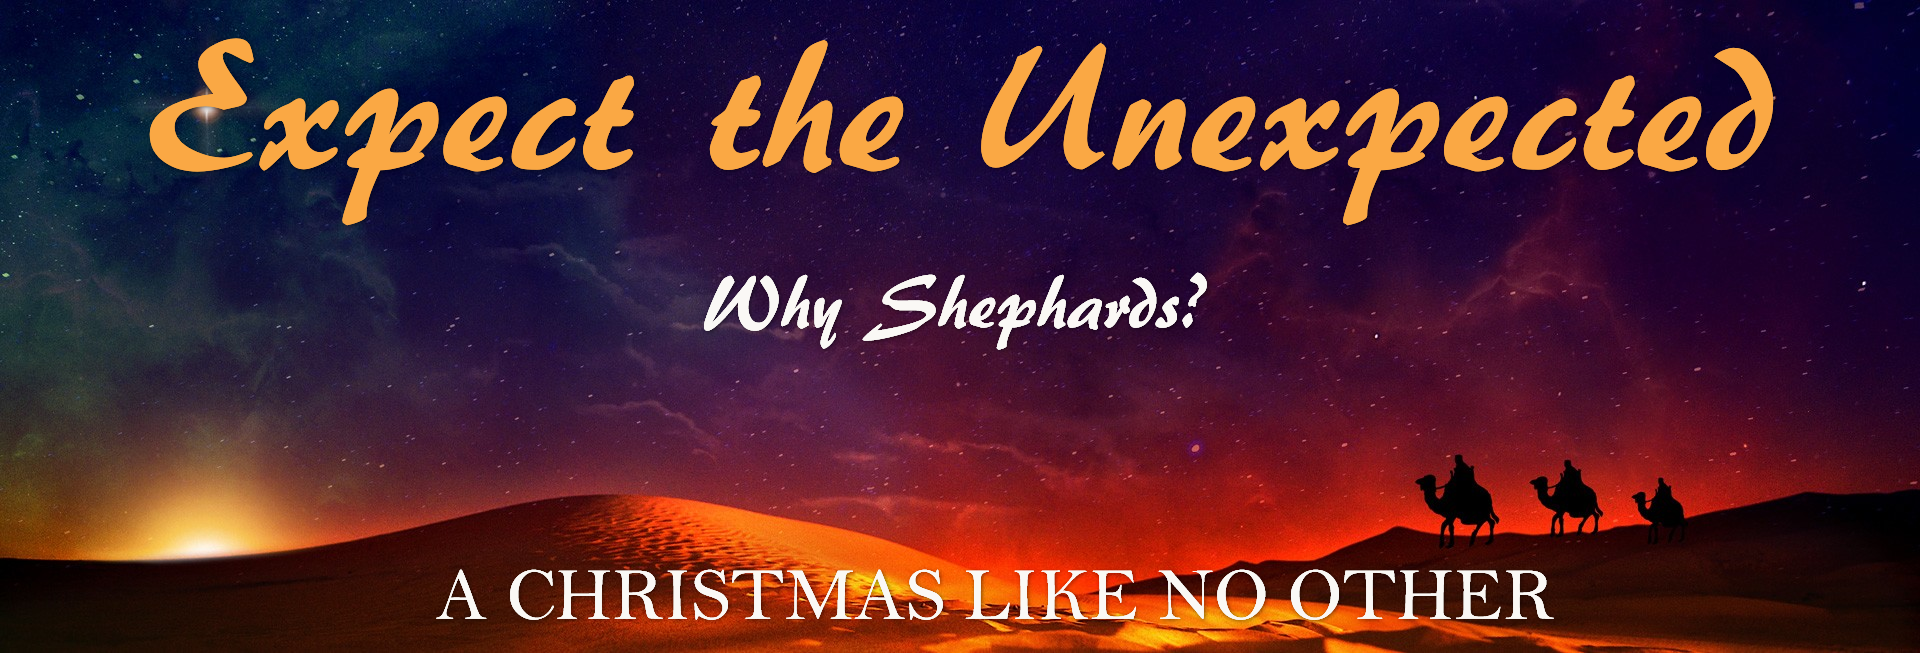 Expect the Unexpected Christmas Website Banner